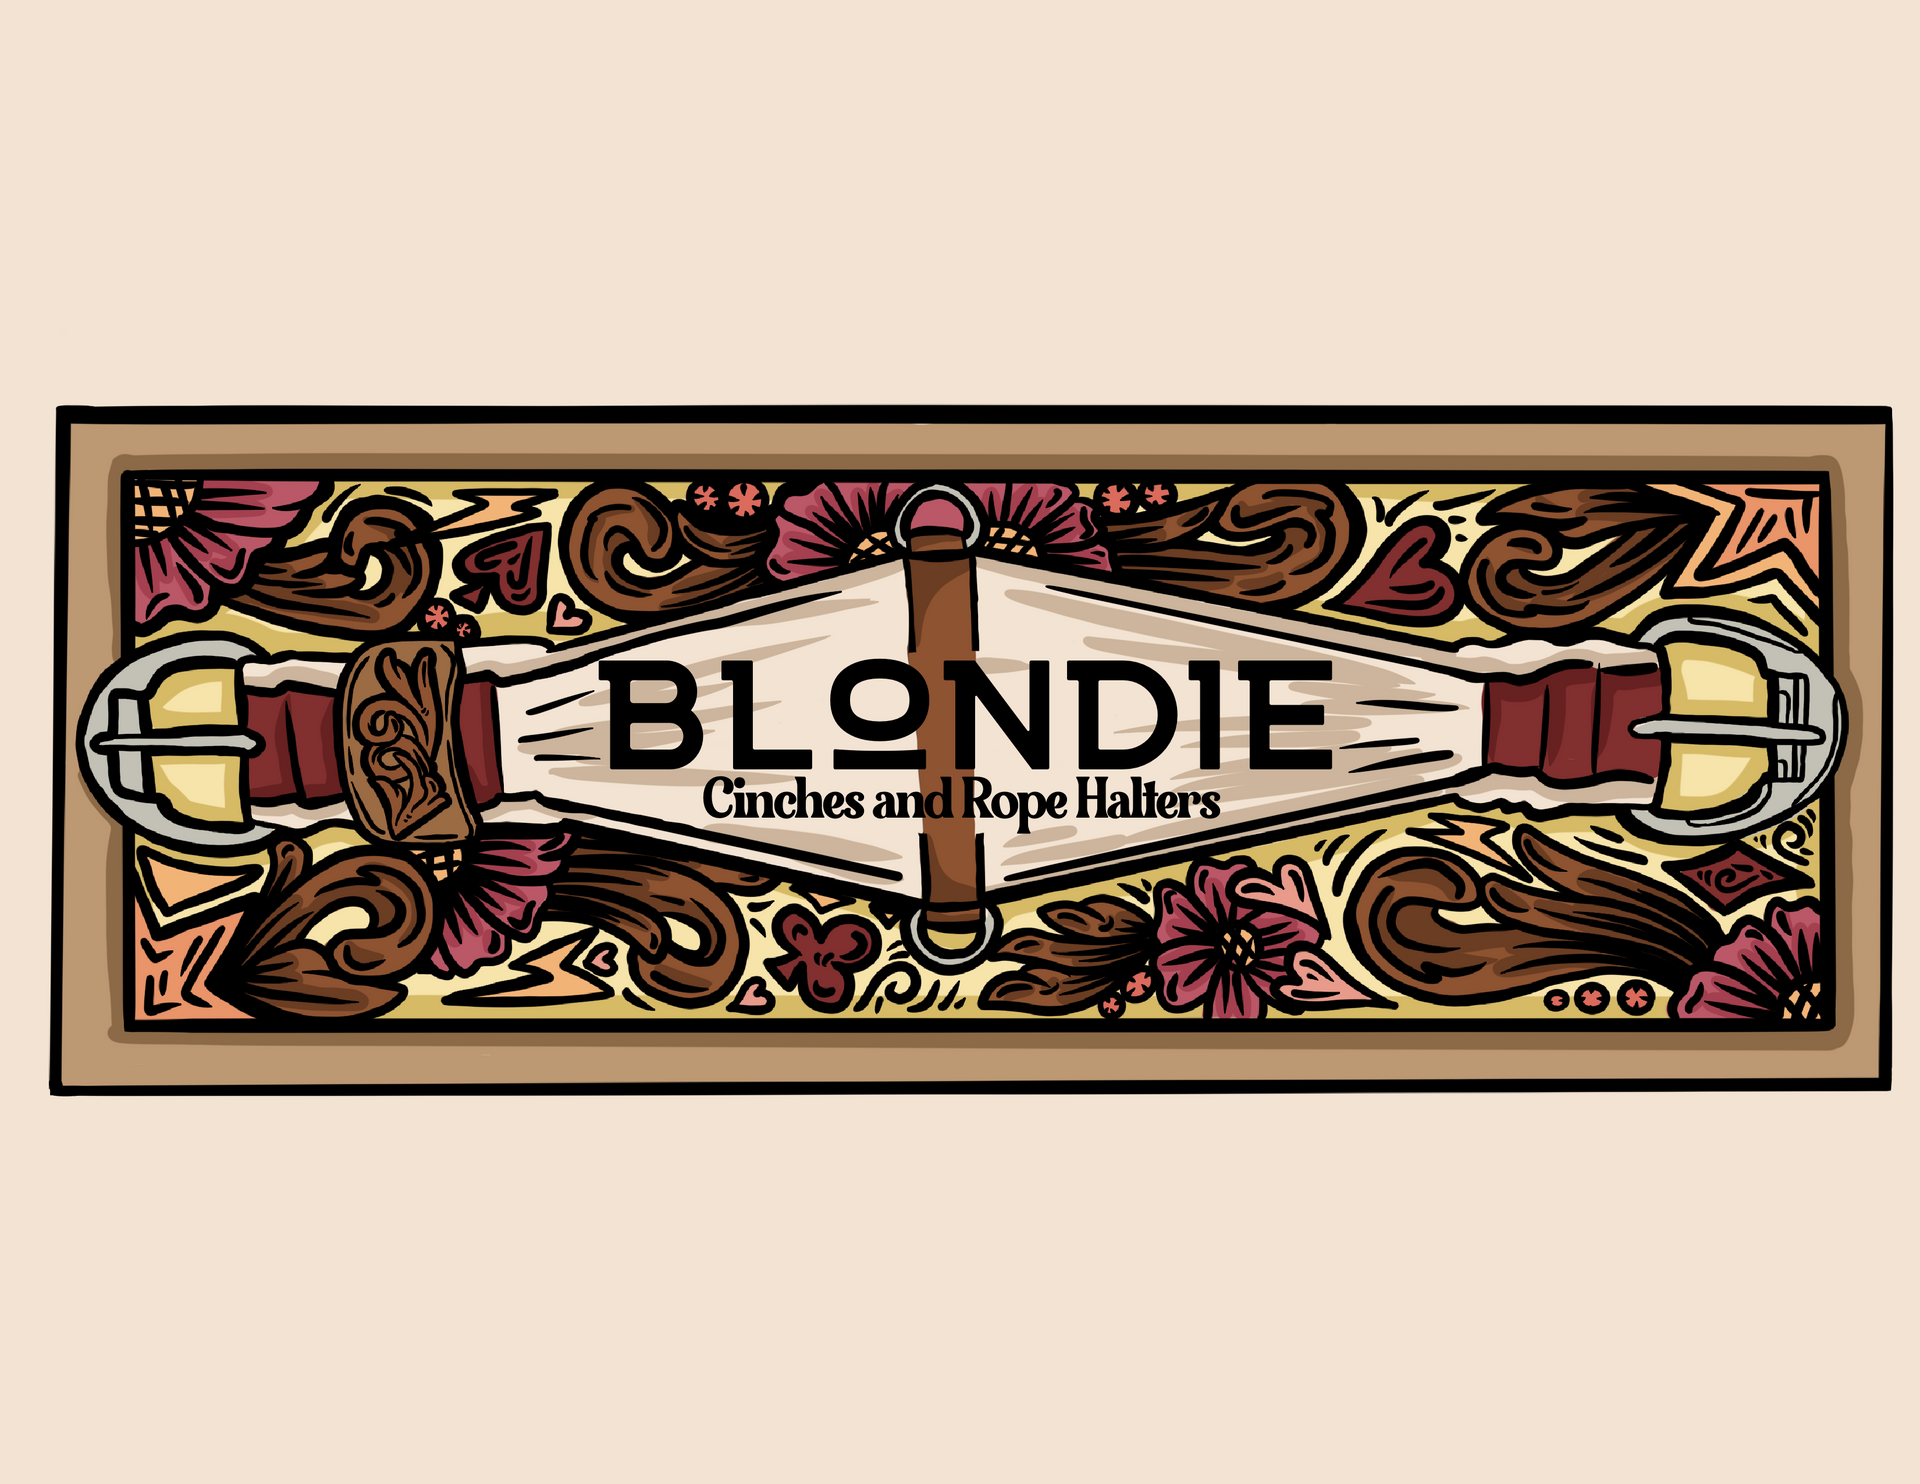 Load video: Blondie cinches and rope halters product preview, includes mohair cinches, rope halters, yacht rope lead lines and Mecate reins for horses.